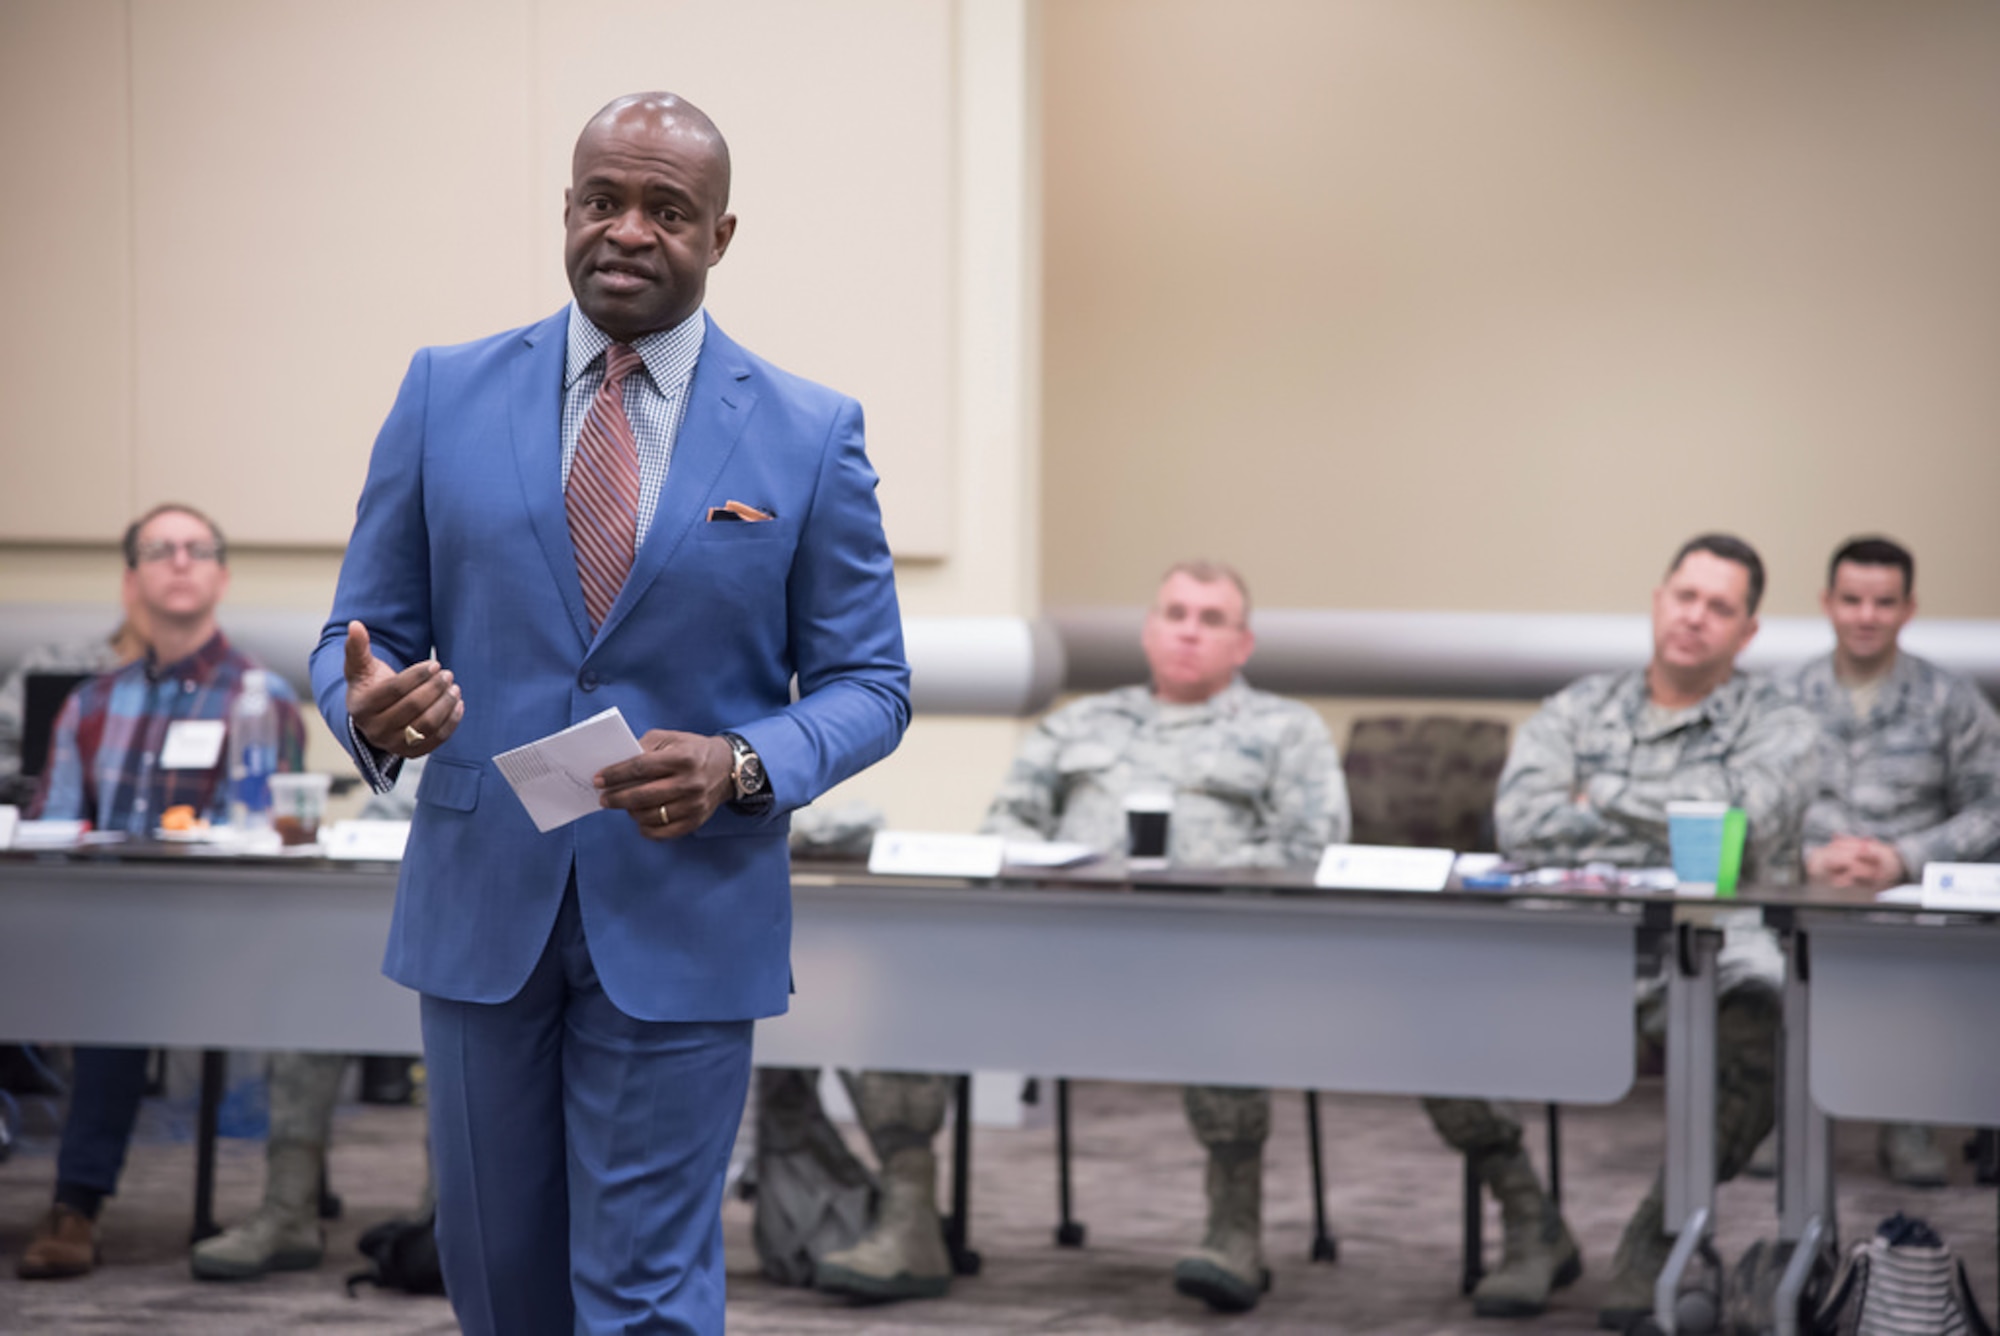 DeMaurice Smith addresses 16 of the Air Force's emerging leaders at the 2018 Squadron Commanders Course here at Joint Base Andrews, Md.